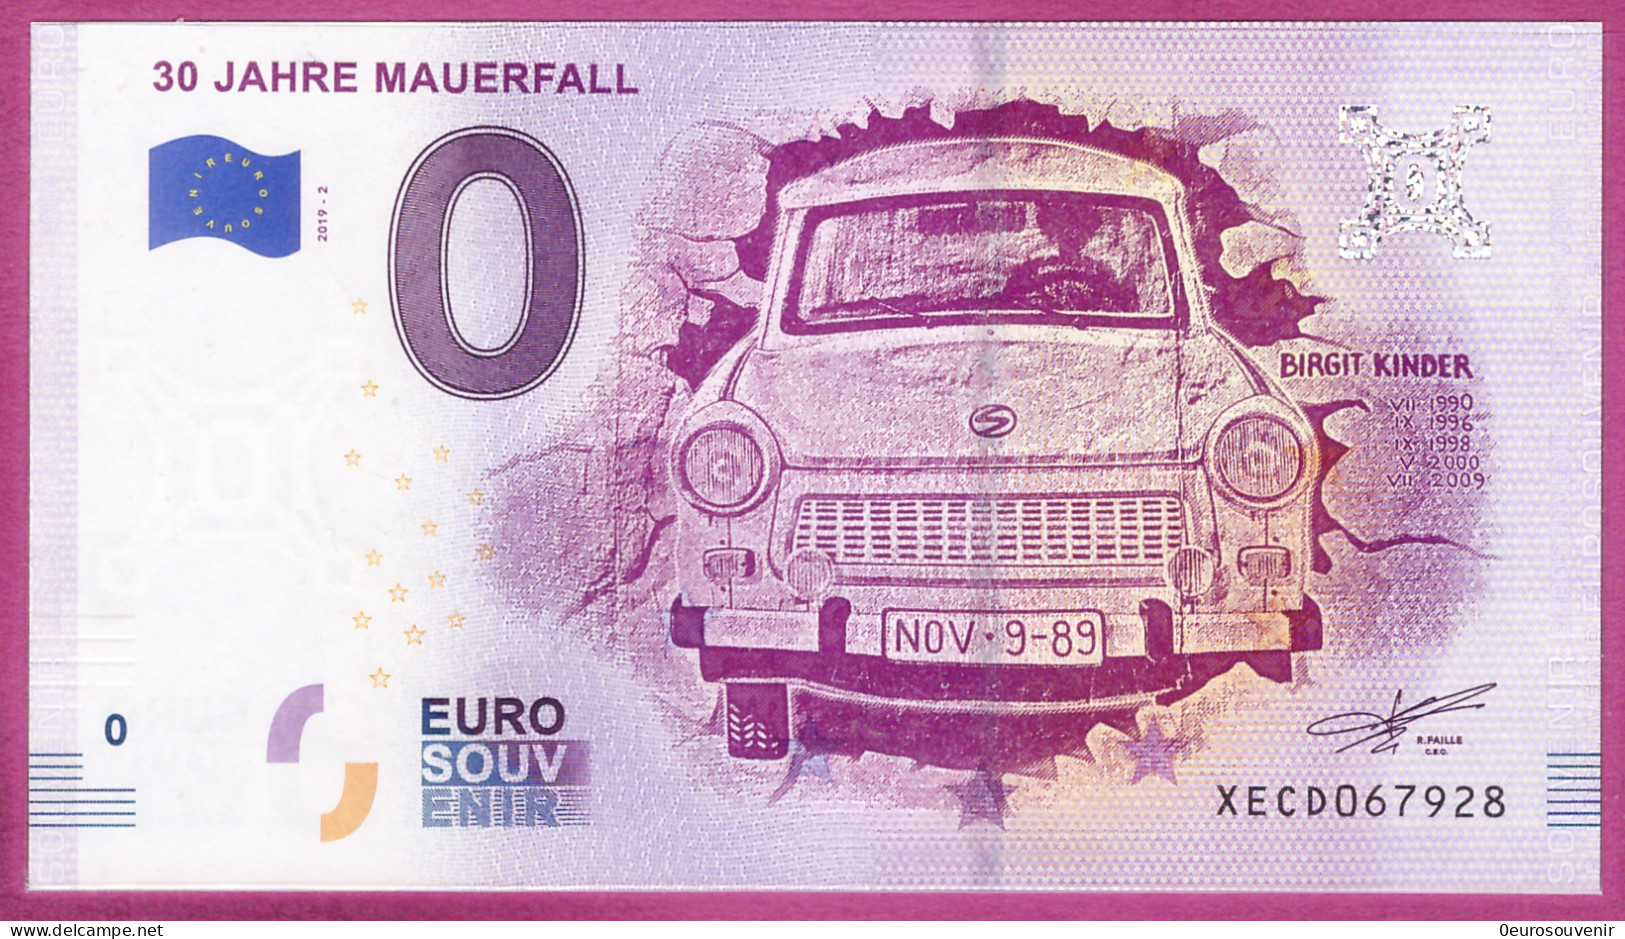 0-Euro XECD 2019-2 30 JAHRE MAUERFALL - R 3.1 IMPRESSUM 1-ZEILIG - Private Proofs / Unofficial